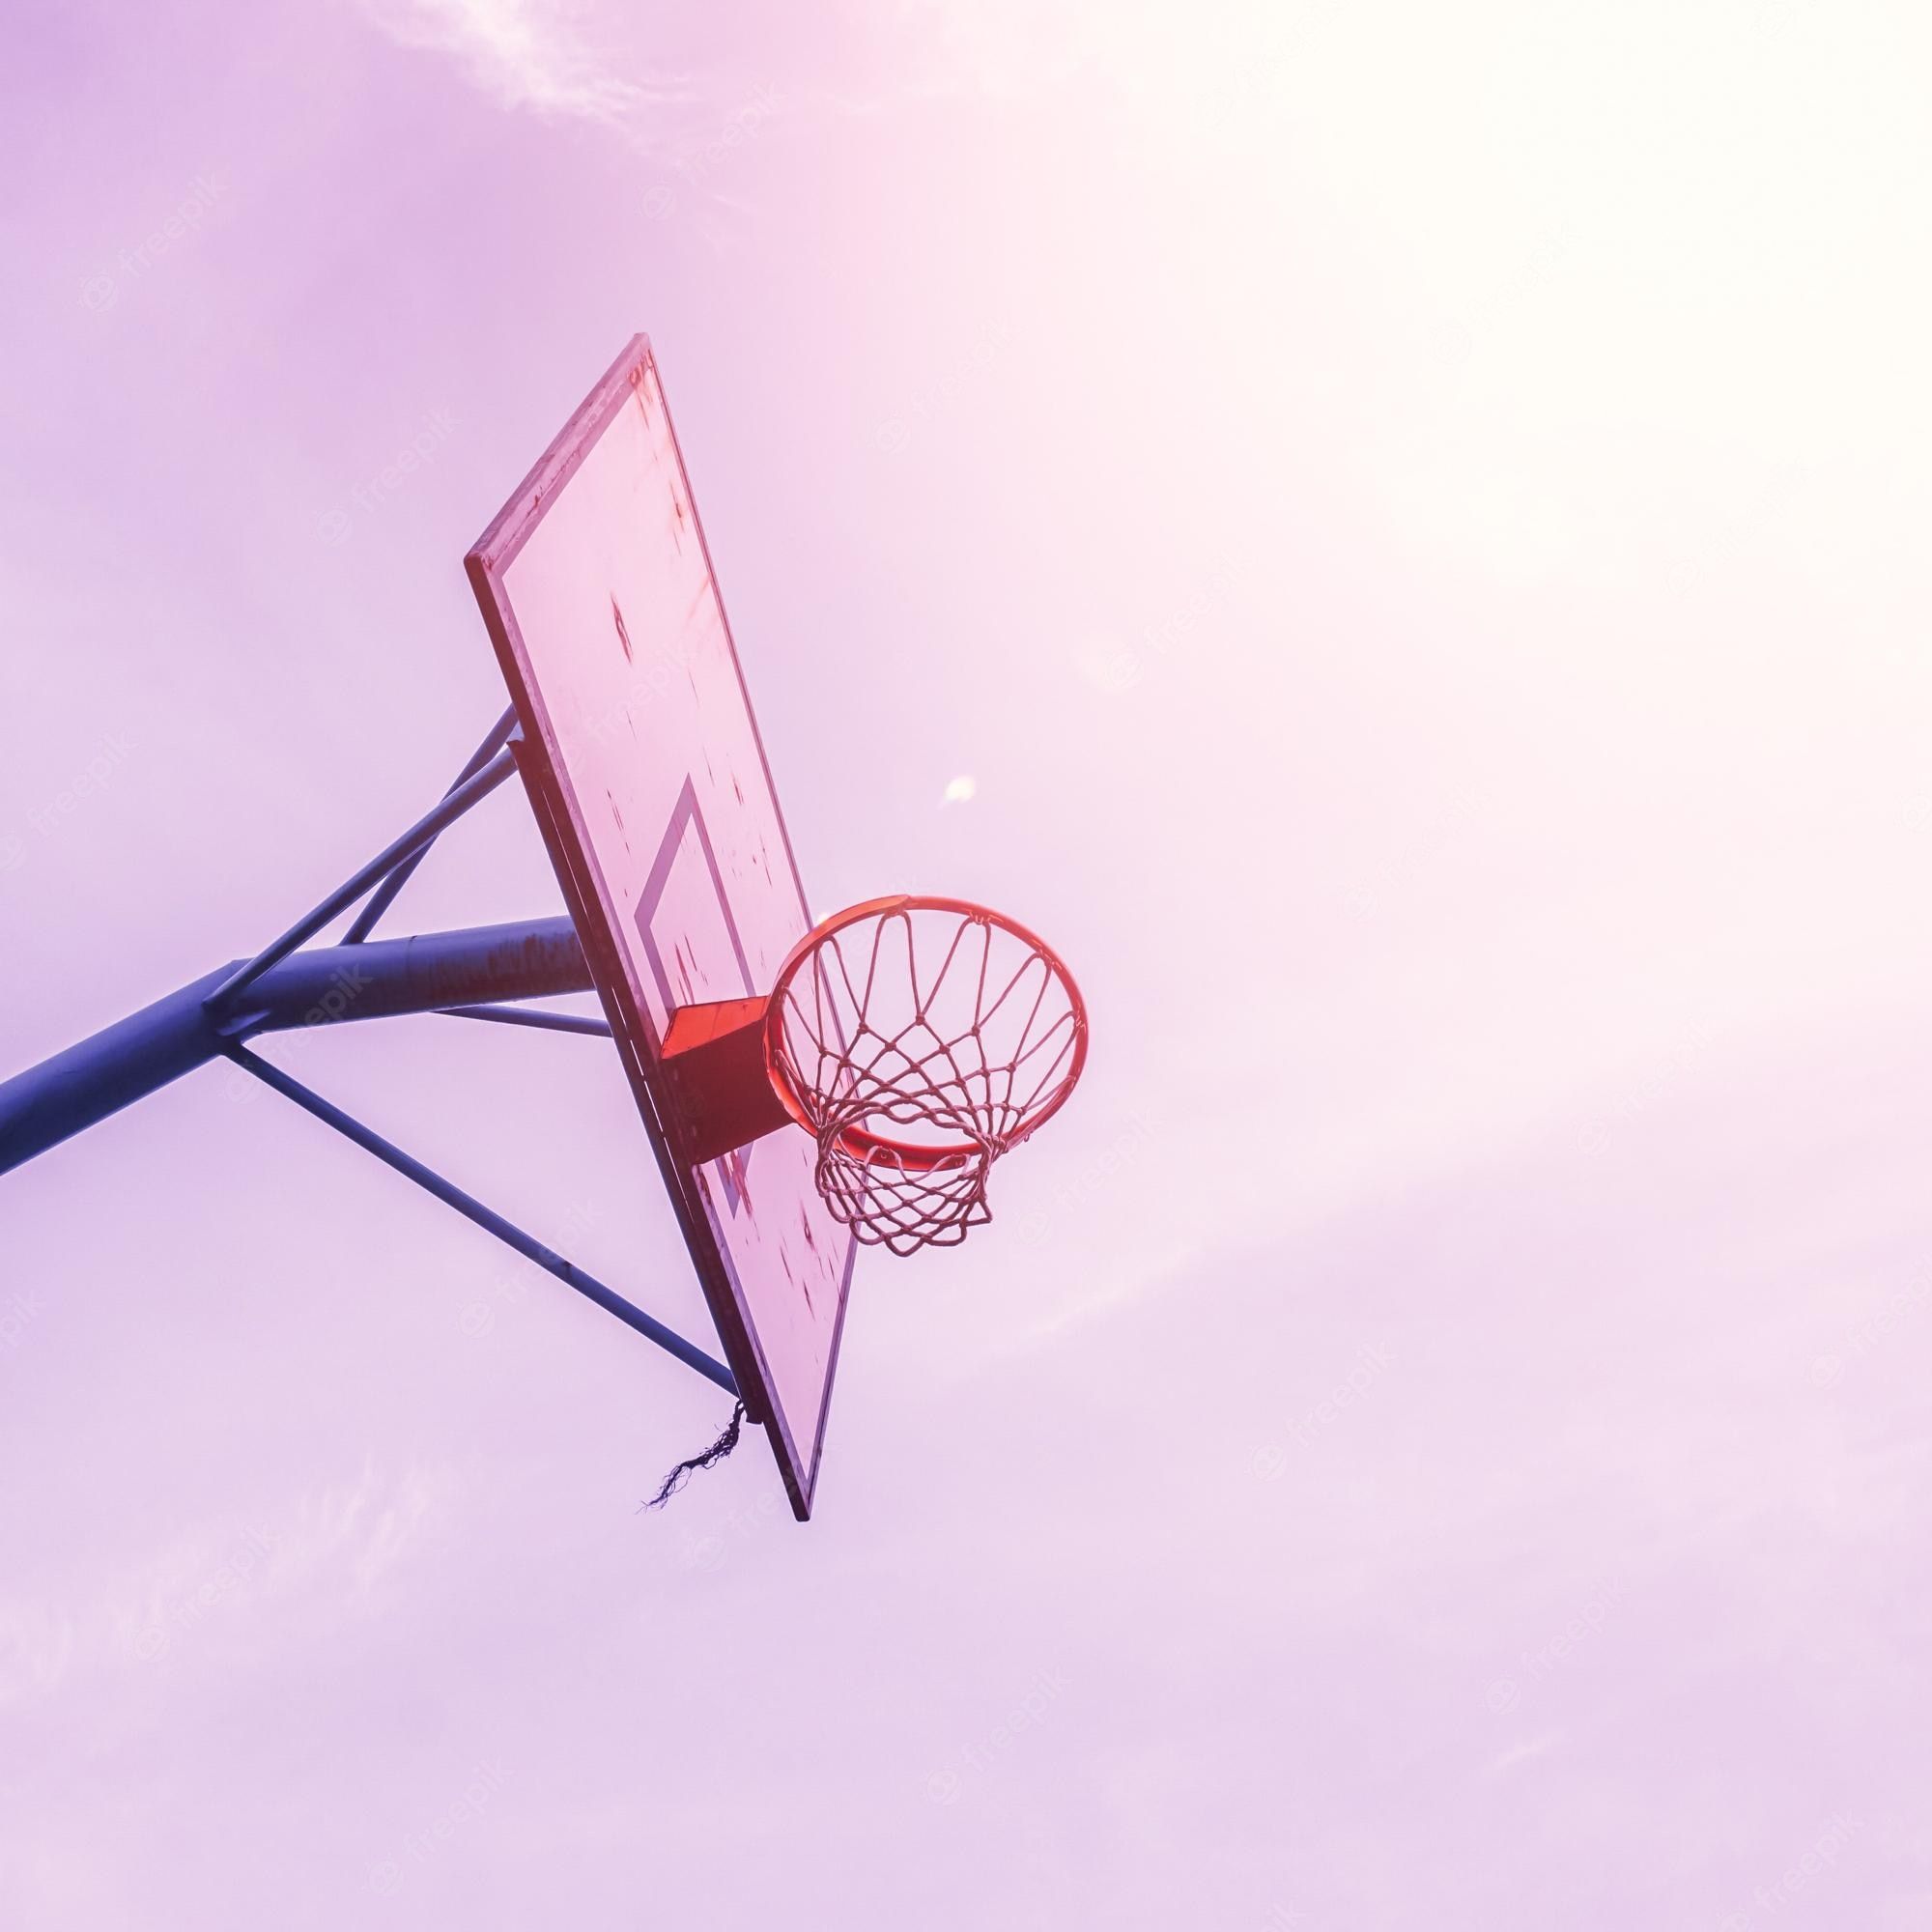 A basketball hoop is in the sky - Basketball